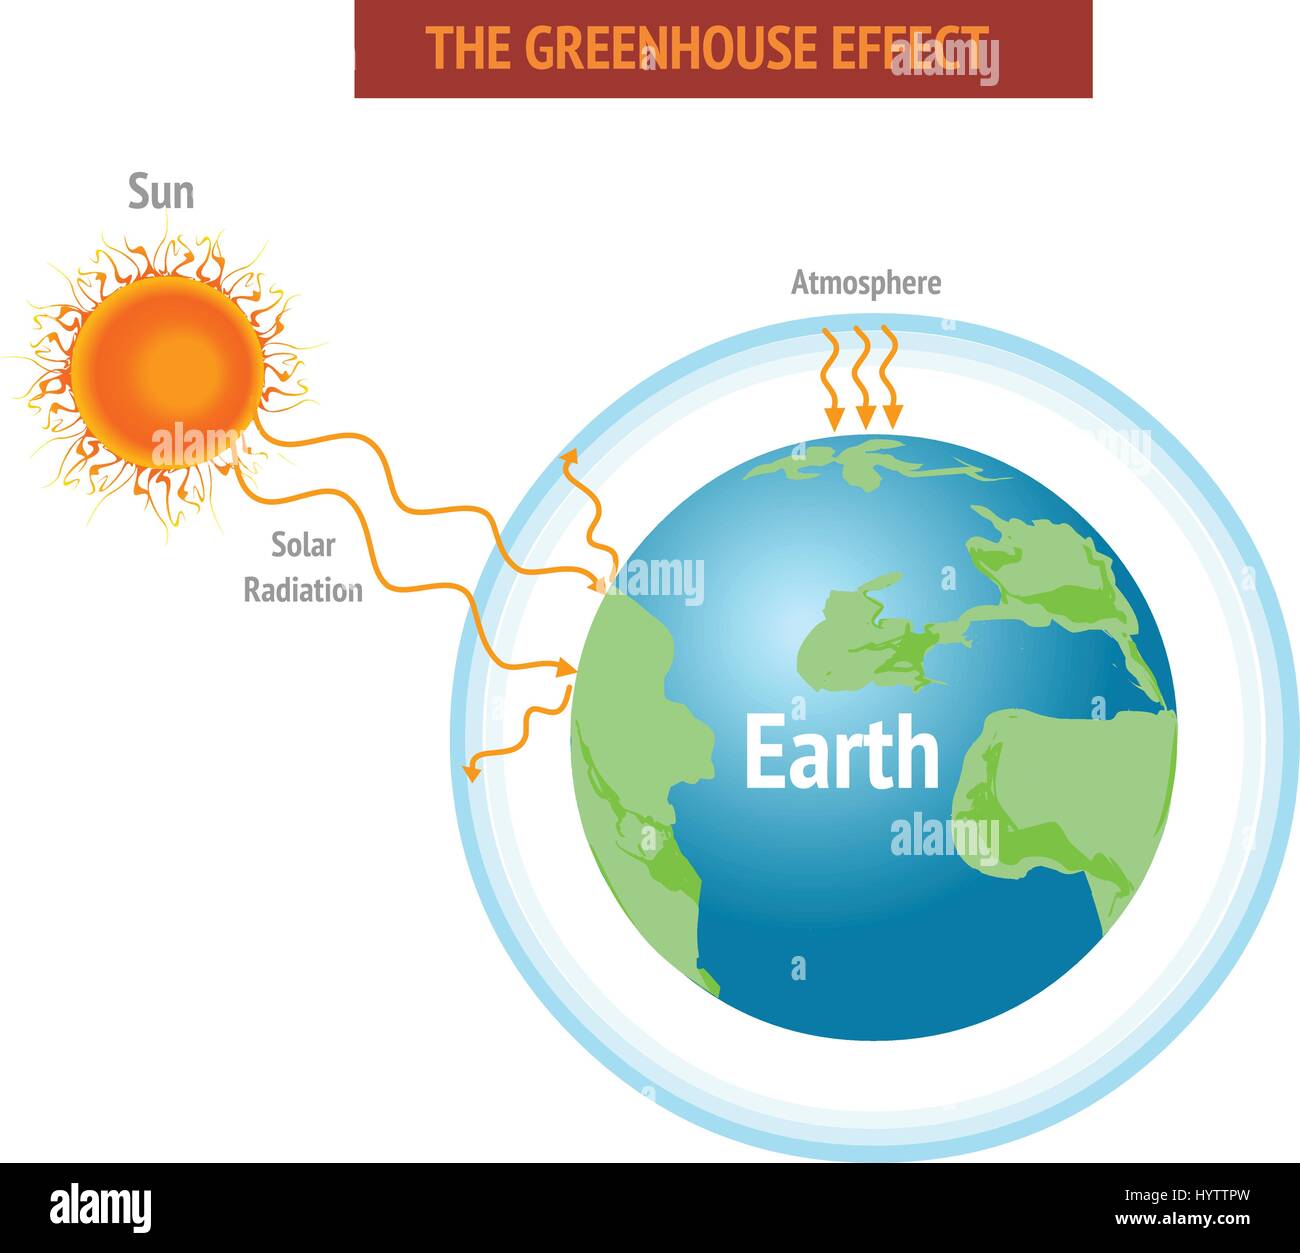 Greenhouse Effect Illustration High Resolution Stock Photography And Images Alamy